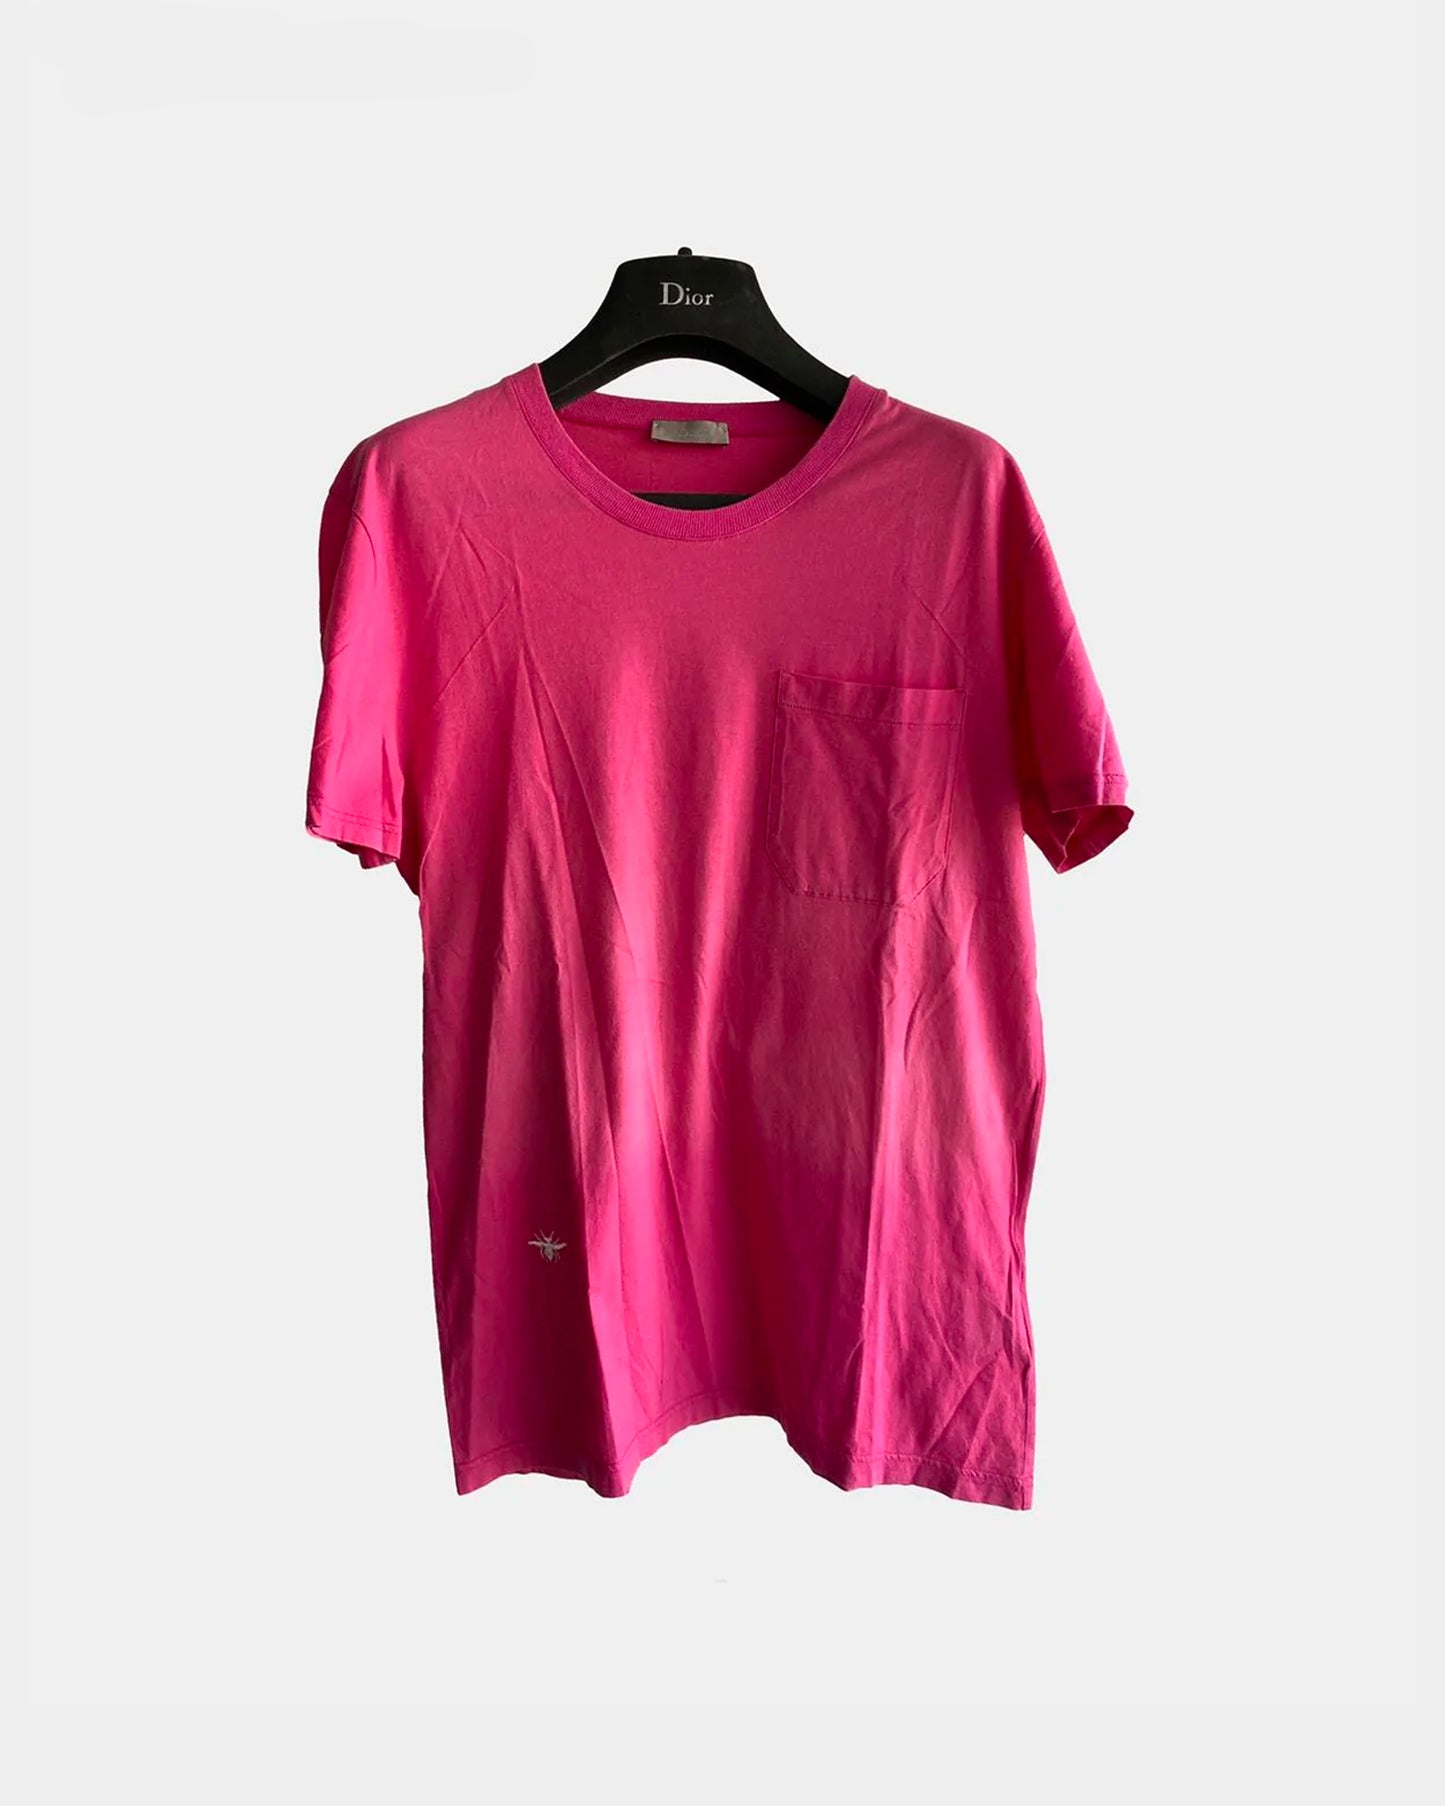 Dior Homme 06 Hedi Pink BEE Shirt XS S